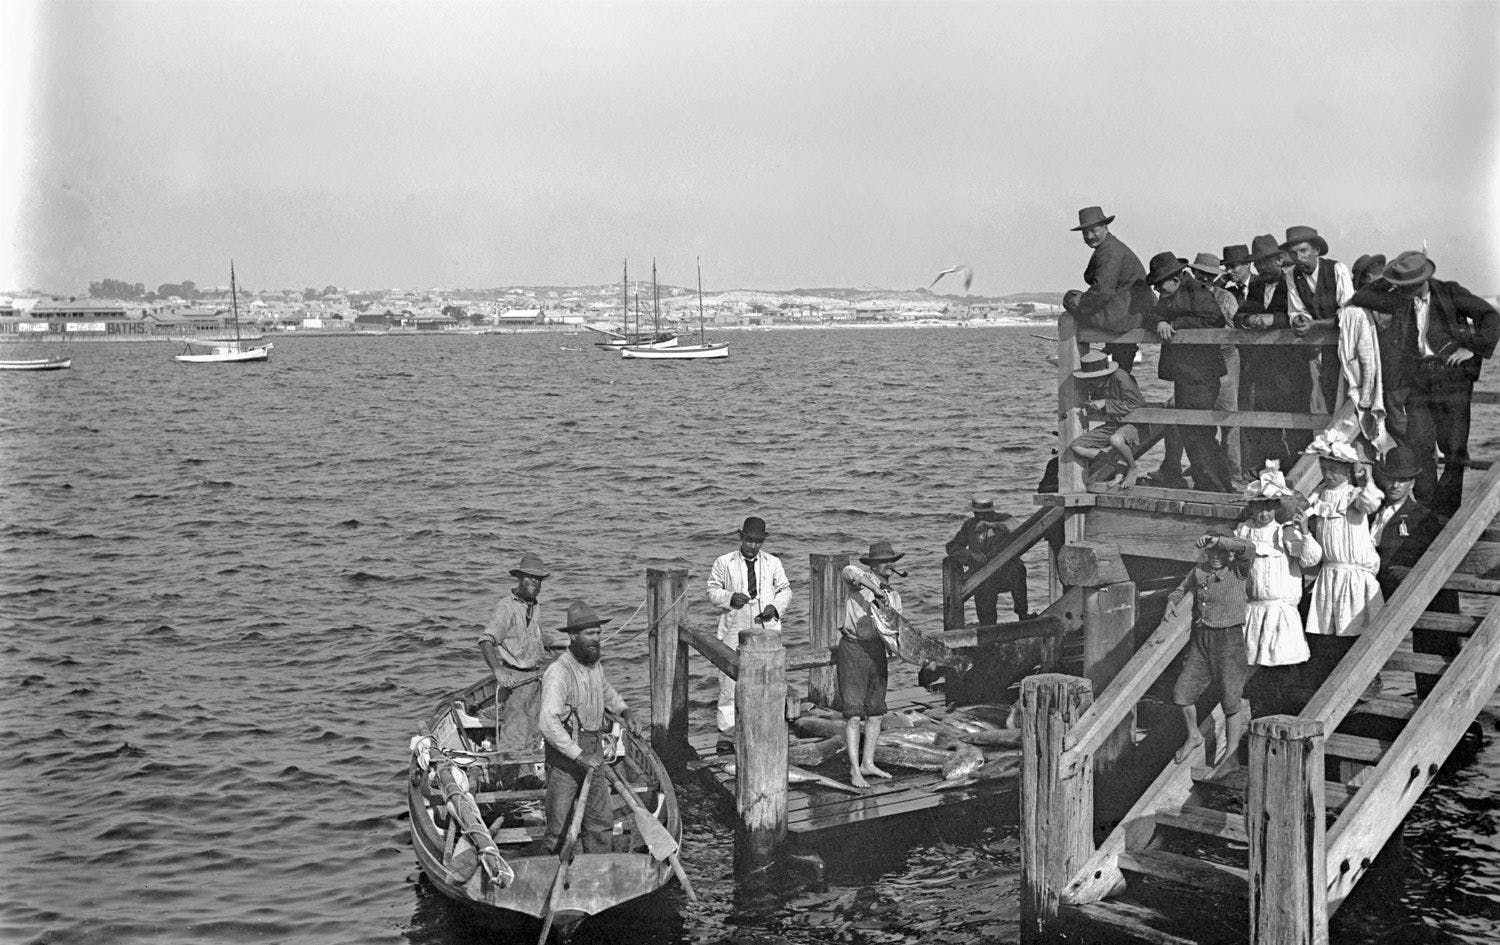 Historic image black and white of fisherman unloading catch onto jetty, moored boats and shoreline in background